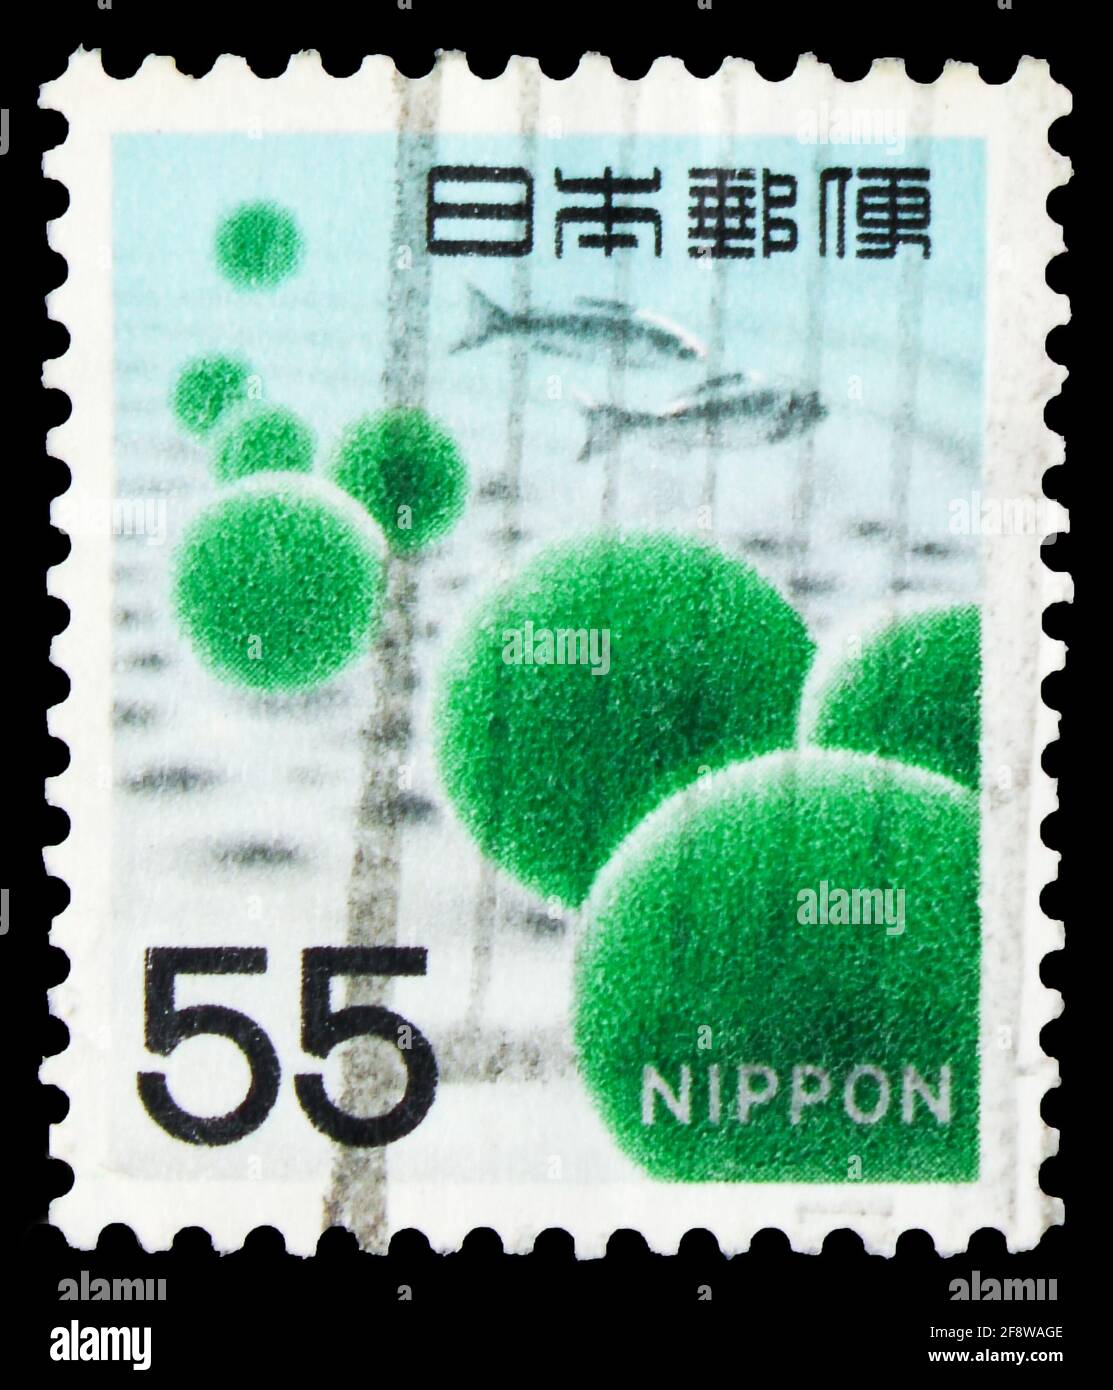 MOSCOW, RUSSIA - OCTOBER 1, 2019: Postage stamp printed in Japan shows Marimo Moss Balls (Aegagropila Linnaei), Fauna, Flora and Cultural Heritage ser Stock Photo